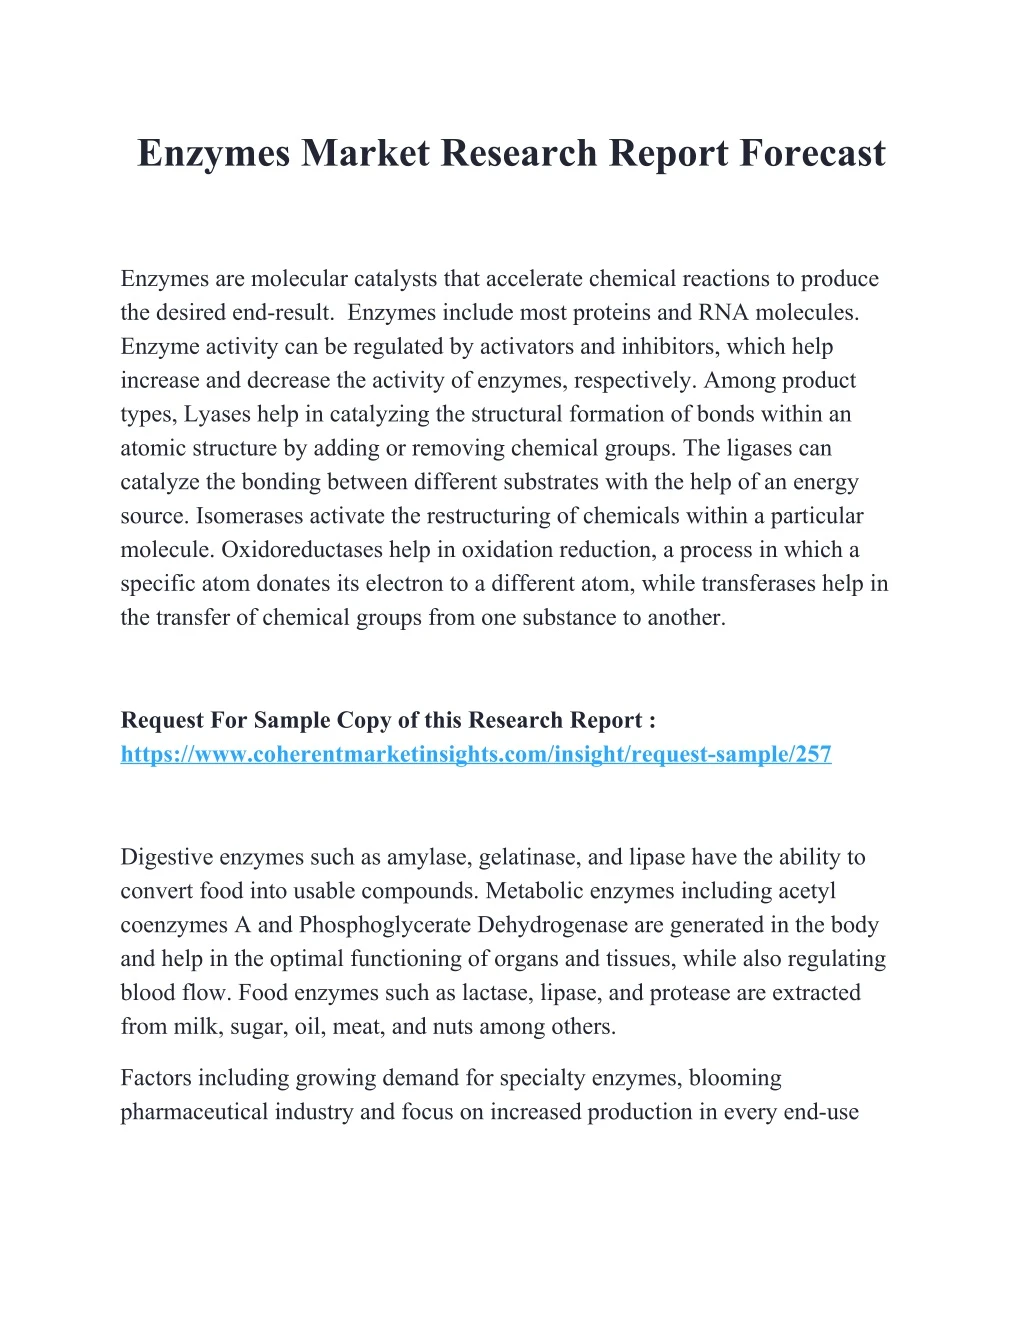 enzymes market research report forecast